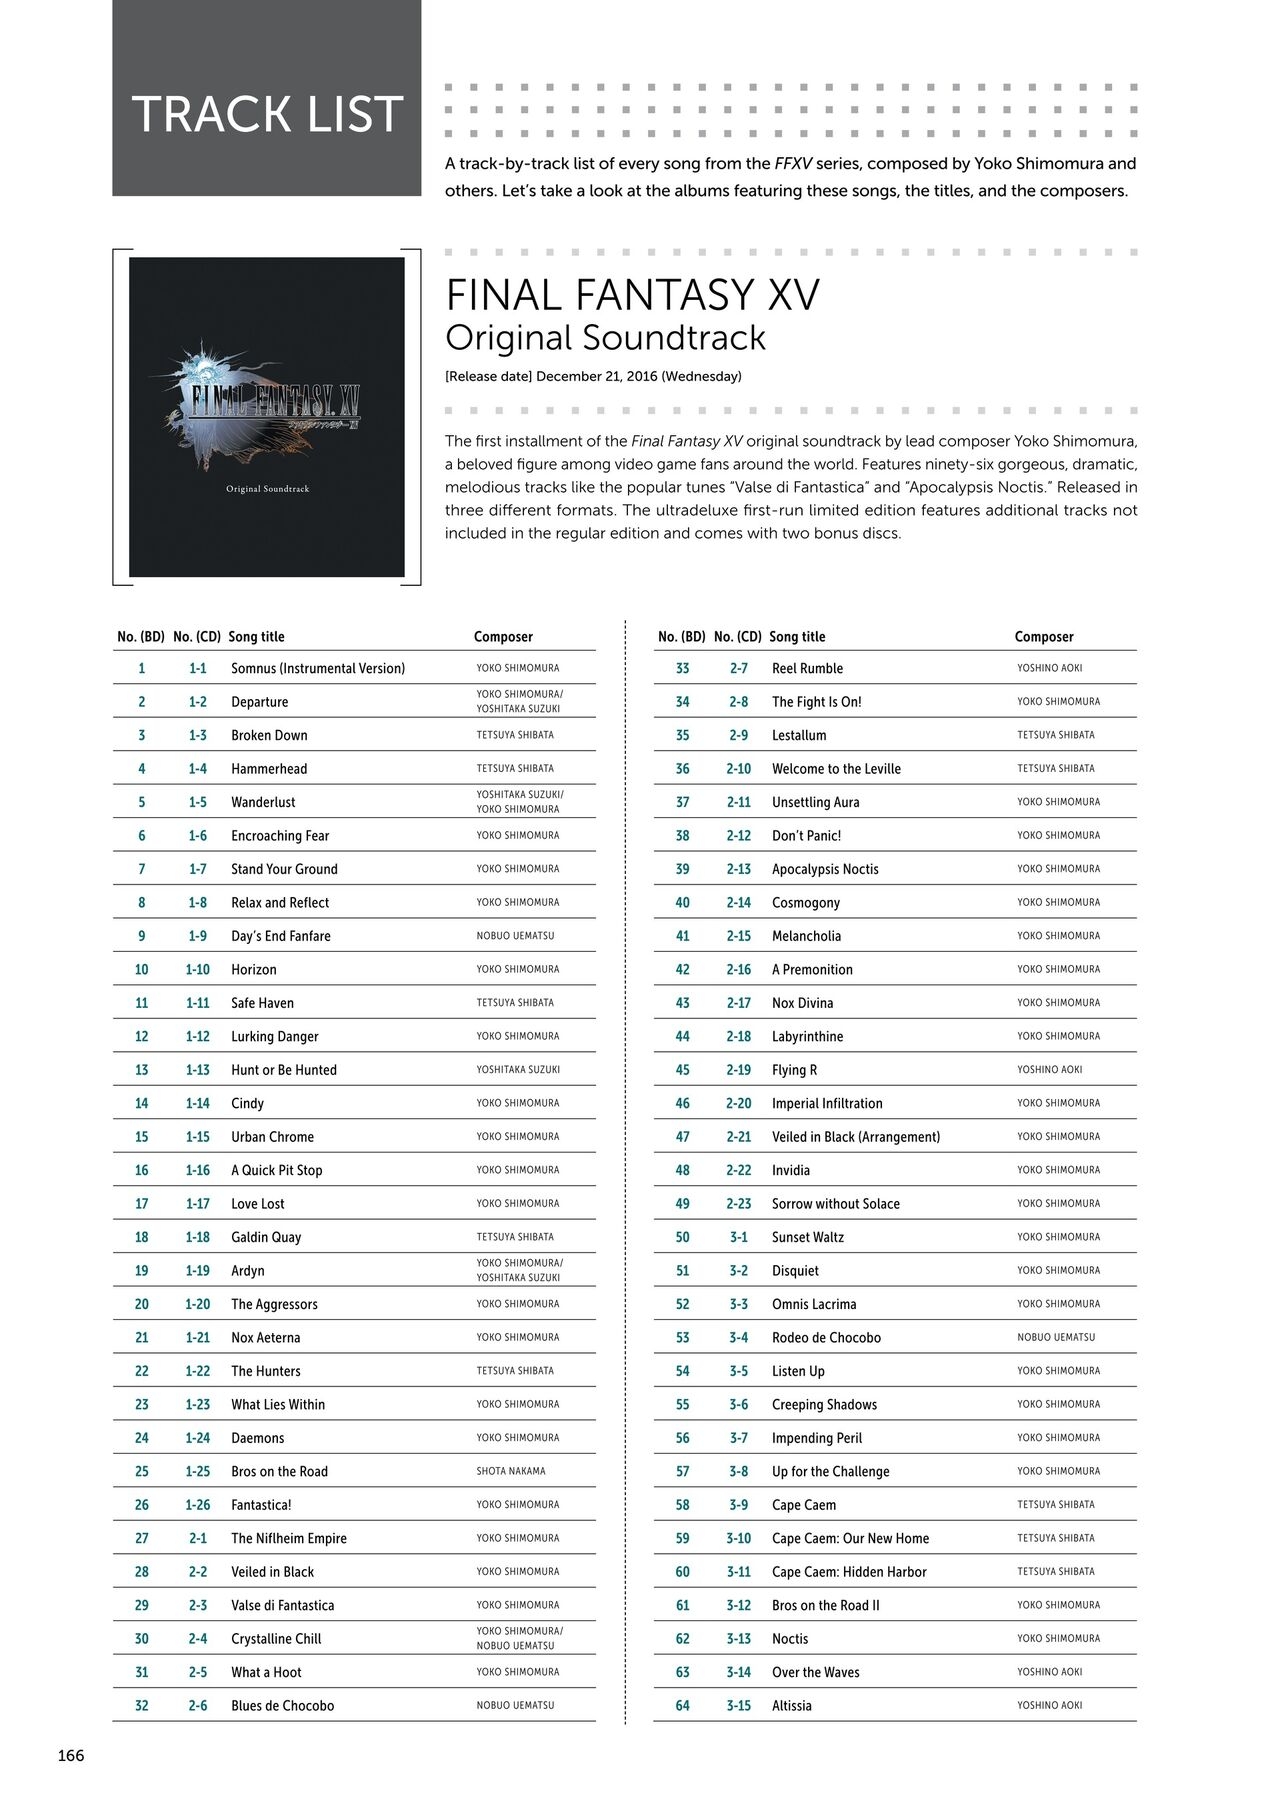 Final Fantasy XV Official Works 140